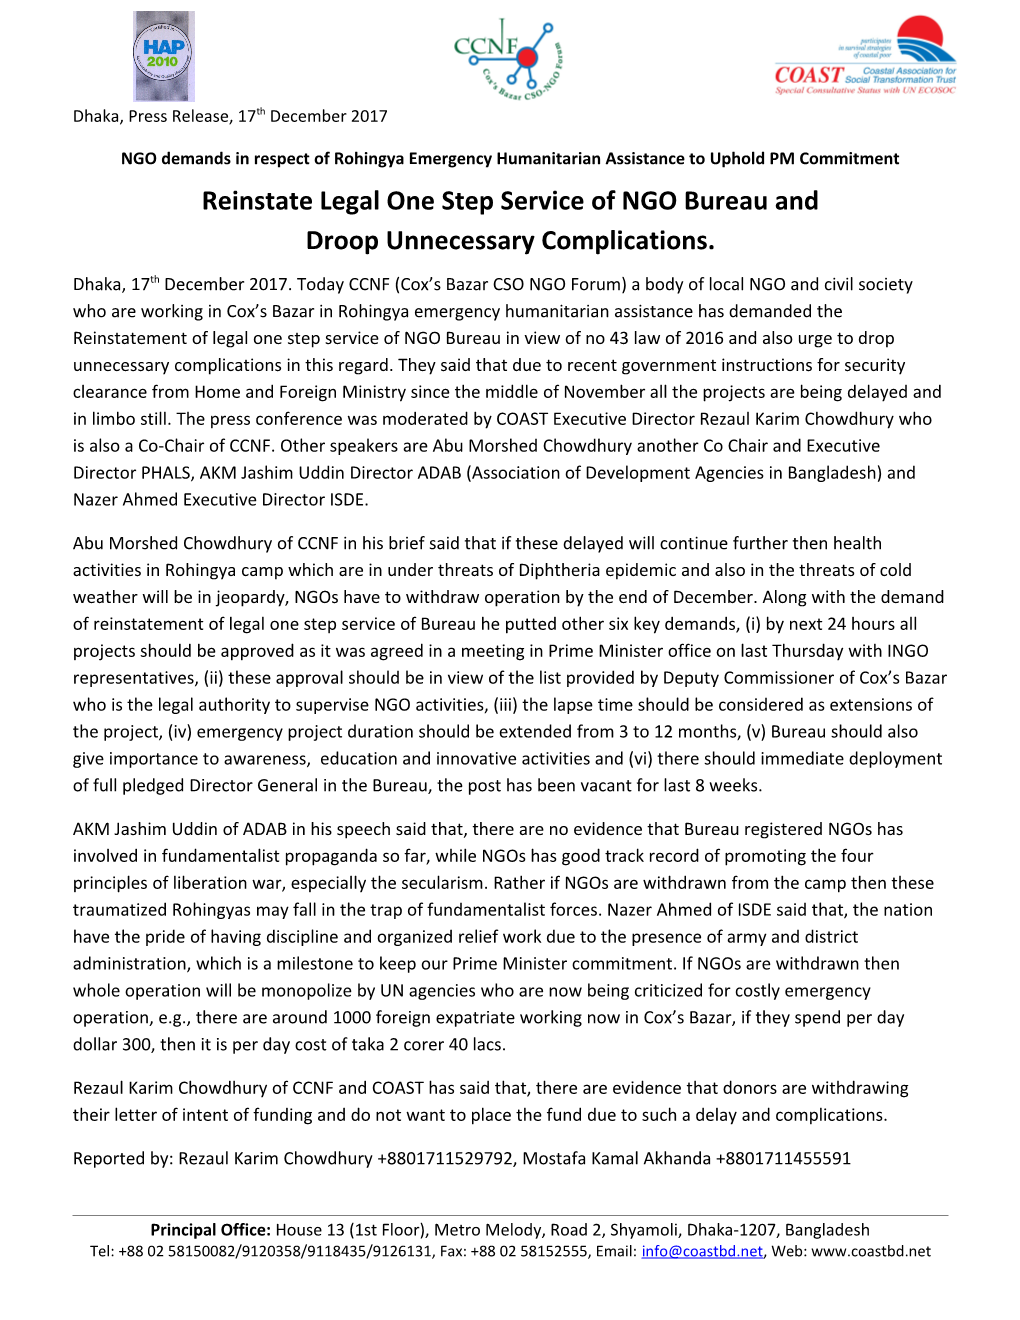 NGO Demands in Respect of Rohingya Emergency Humanitarian Assistance to Uphold PM Commitment